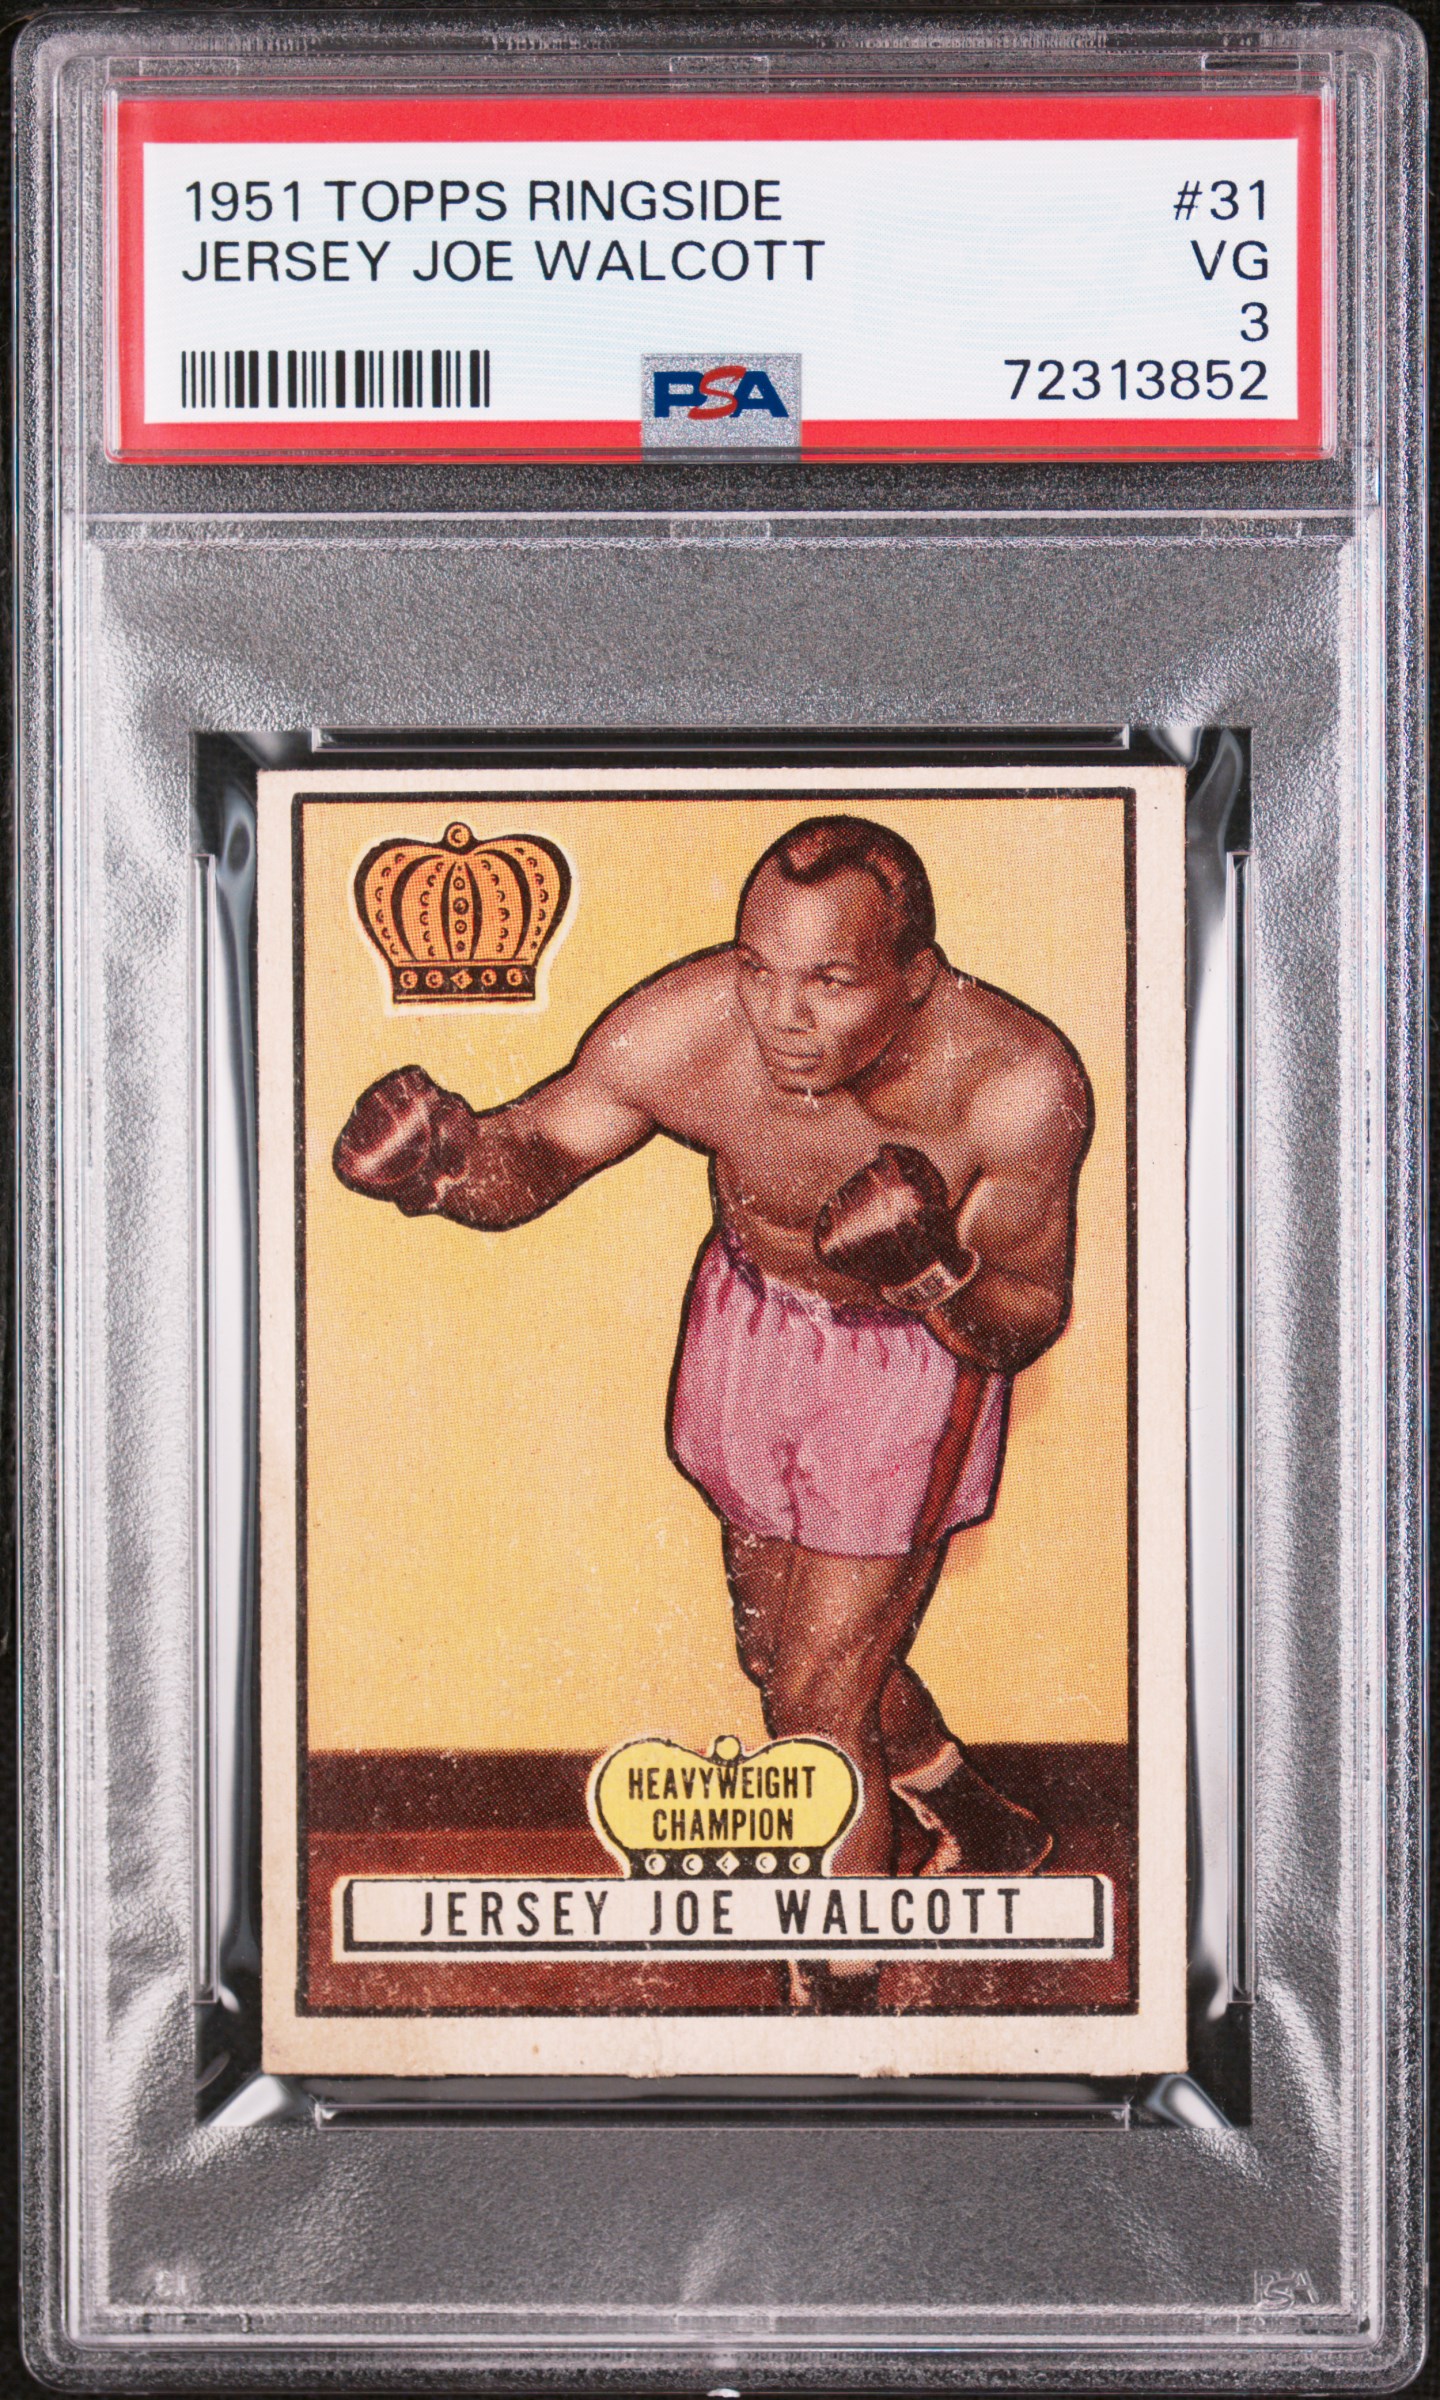 1951 Ring Side Boxing Card 96 Ezzard Charles Heavy Weight 